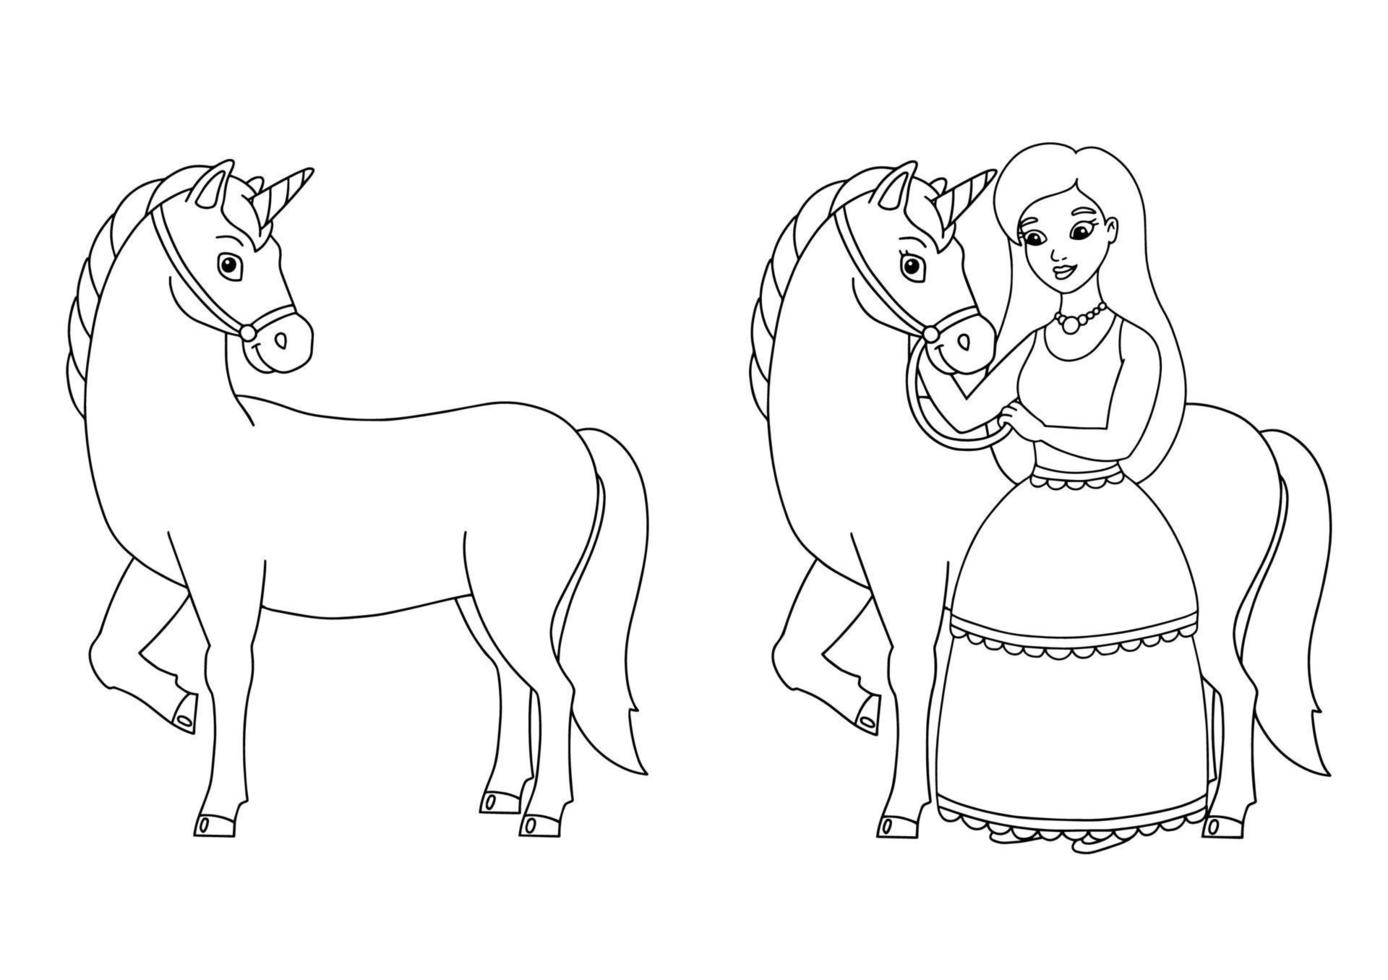 The princess and the unicorn. Coloring book page for kids. Cartoon style character. Vector illustration isolated on white background.